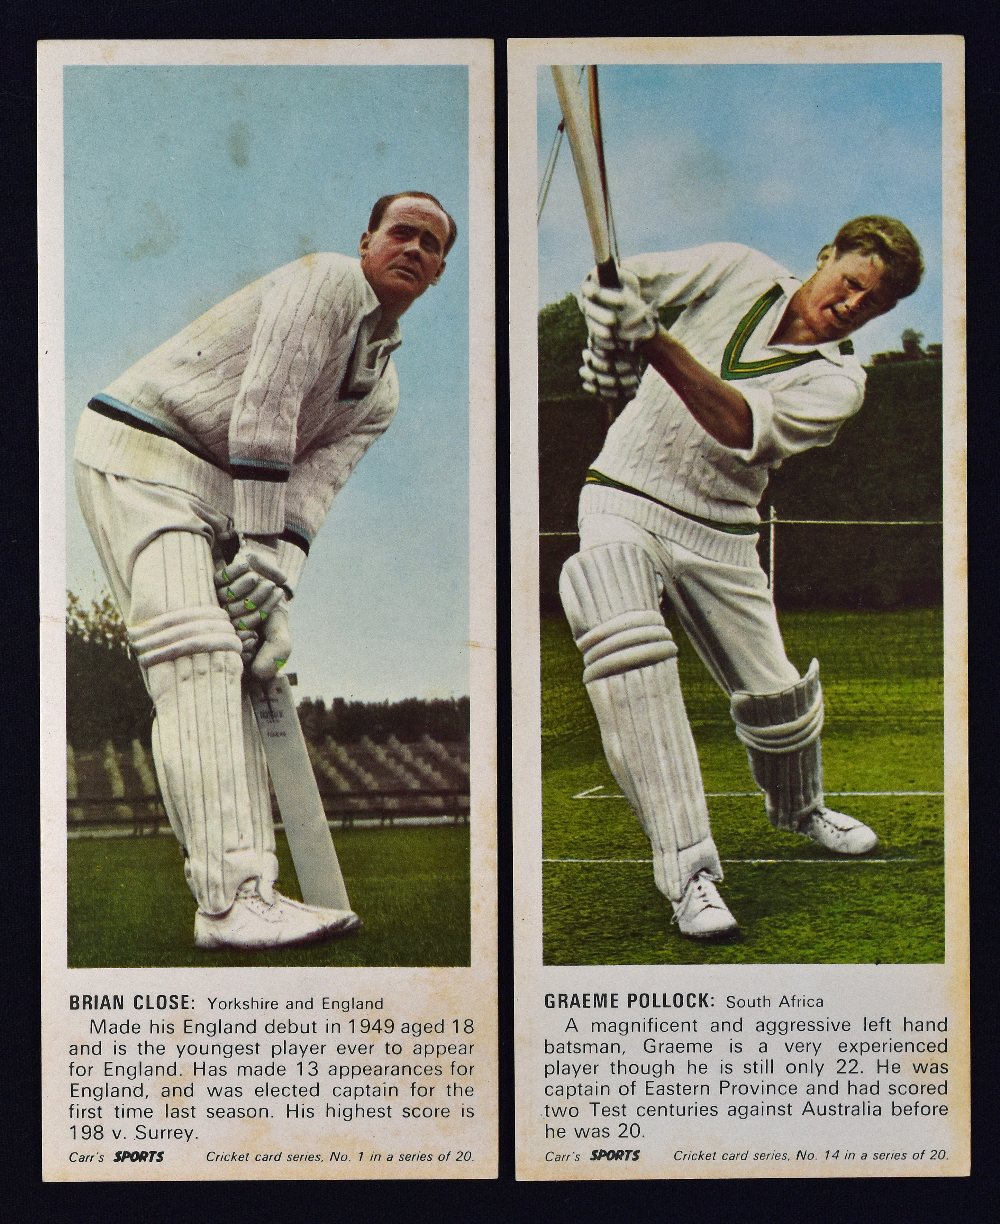 Carr’s Sorts Cricket Card Series Cigarette Cards a complete set of 20 cards in colour depicting